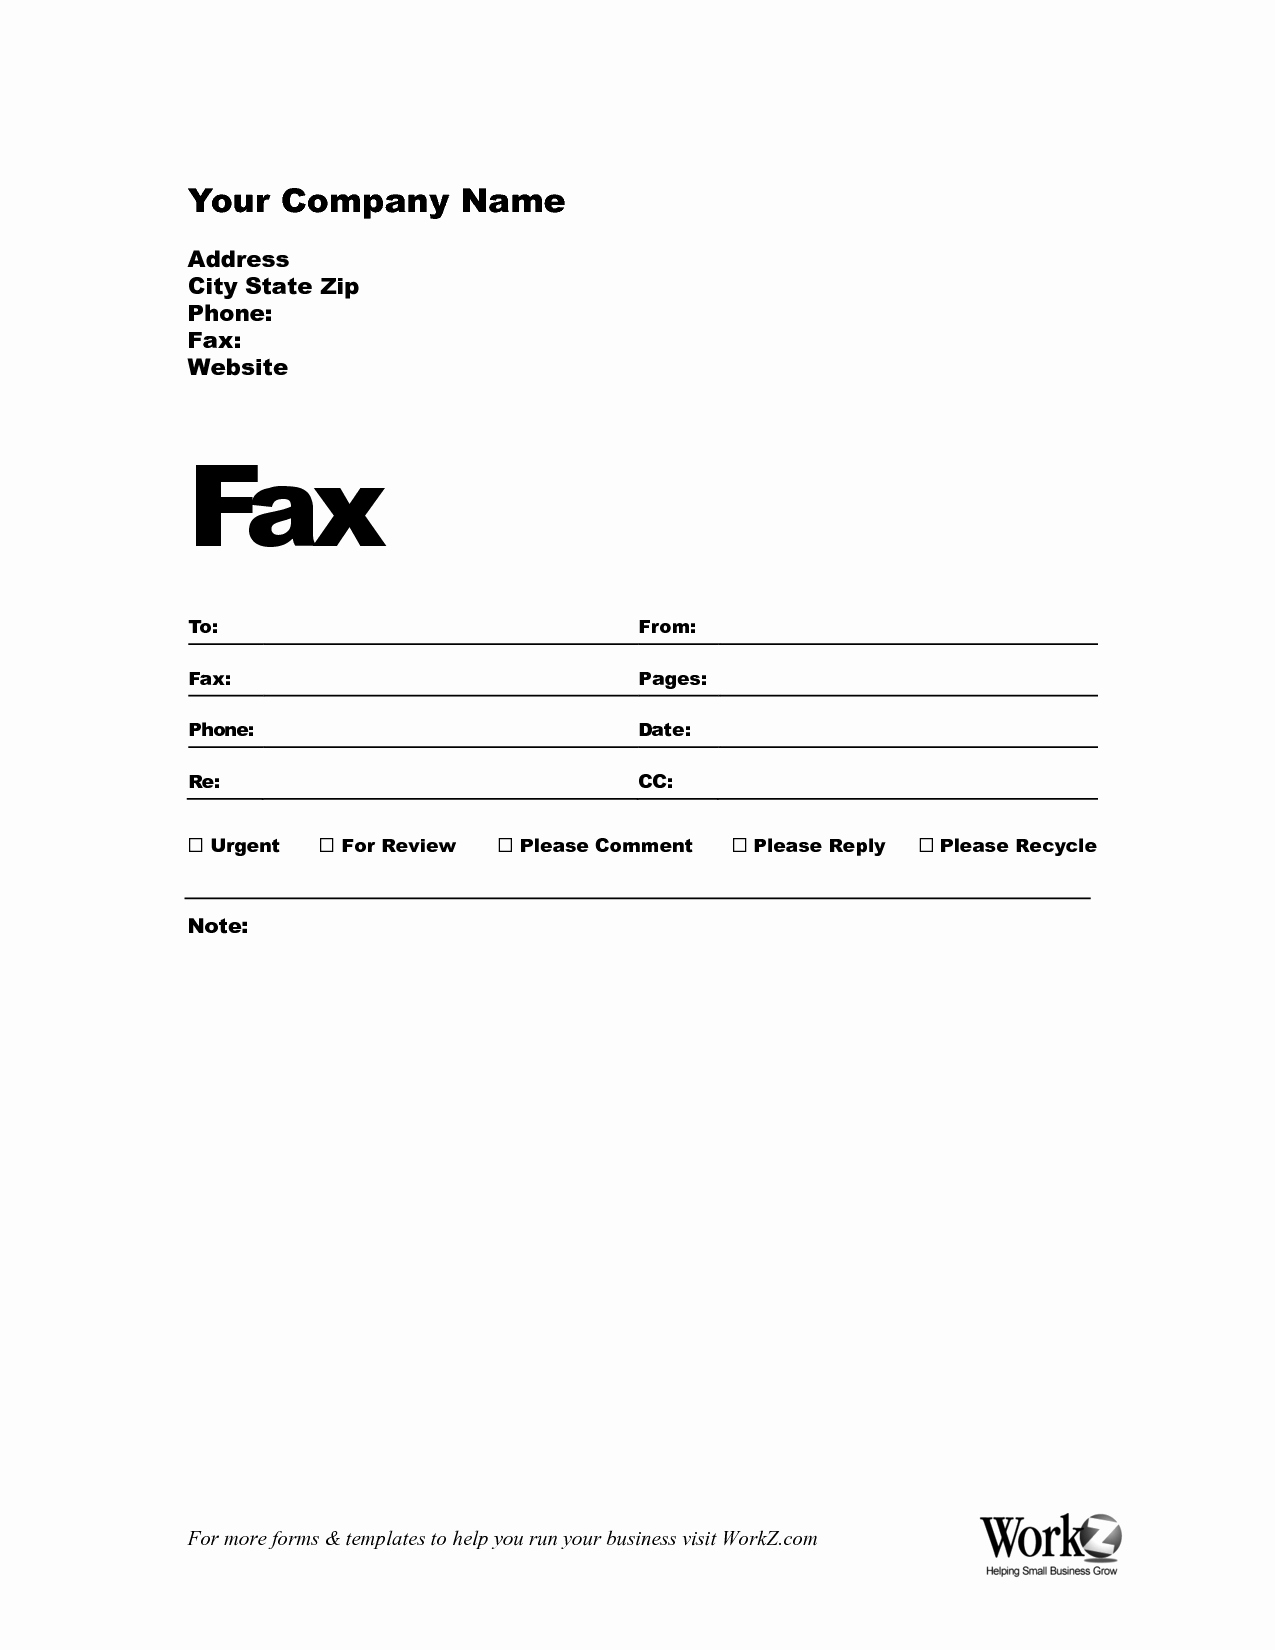 Cover Letter for A Fax Inspirational Free Fax Cover Sheet Template Bamboodownunder